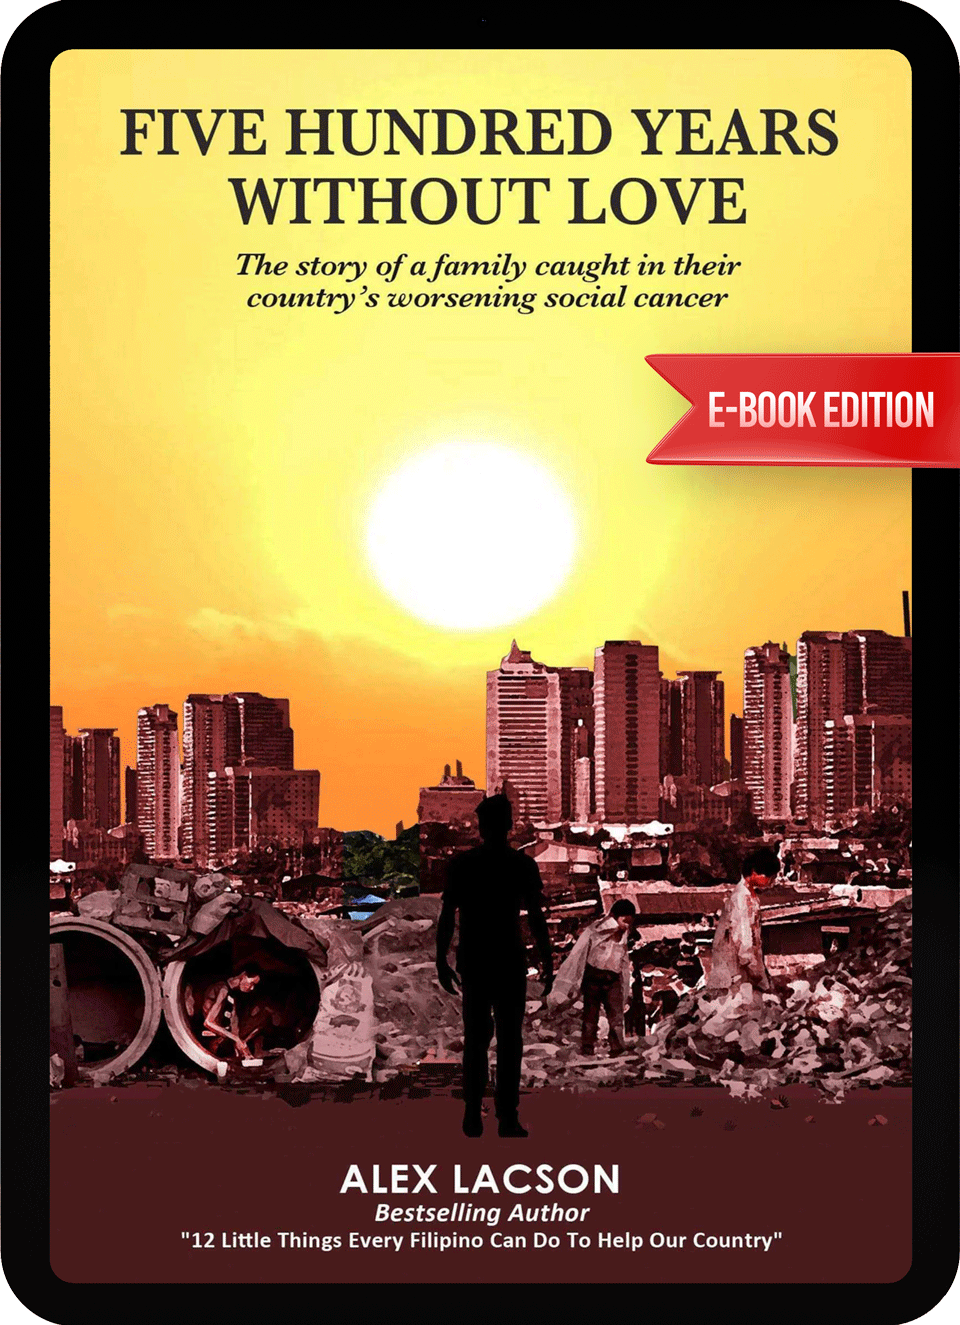 eBook: 500 Years Without Love: The Story of a Family Caught in their Country's Worsening Social Cancer